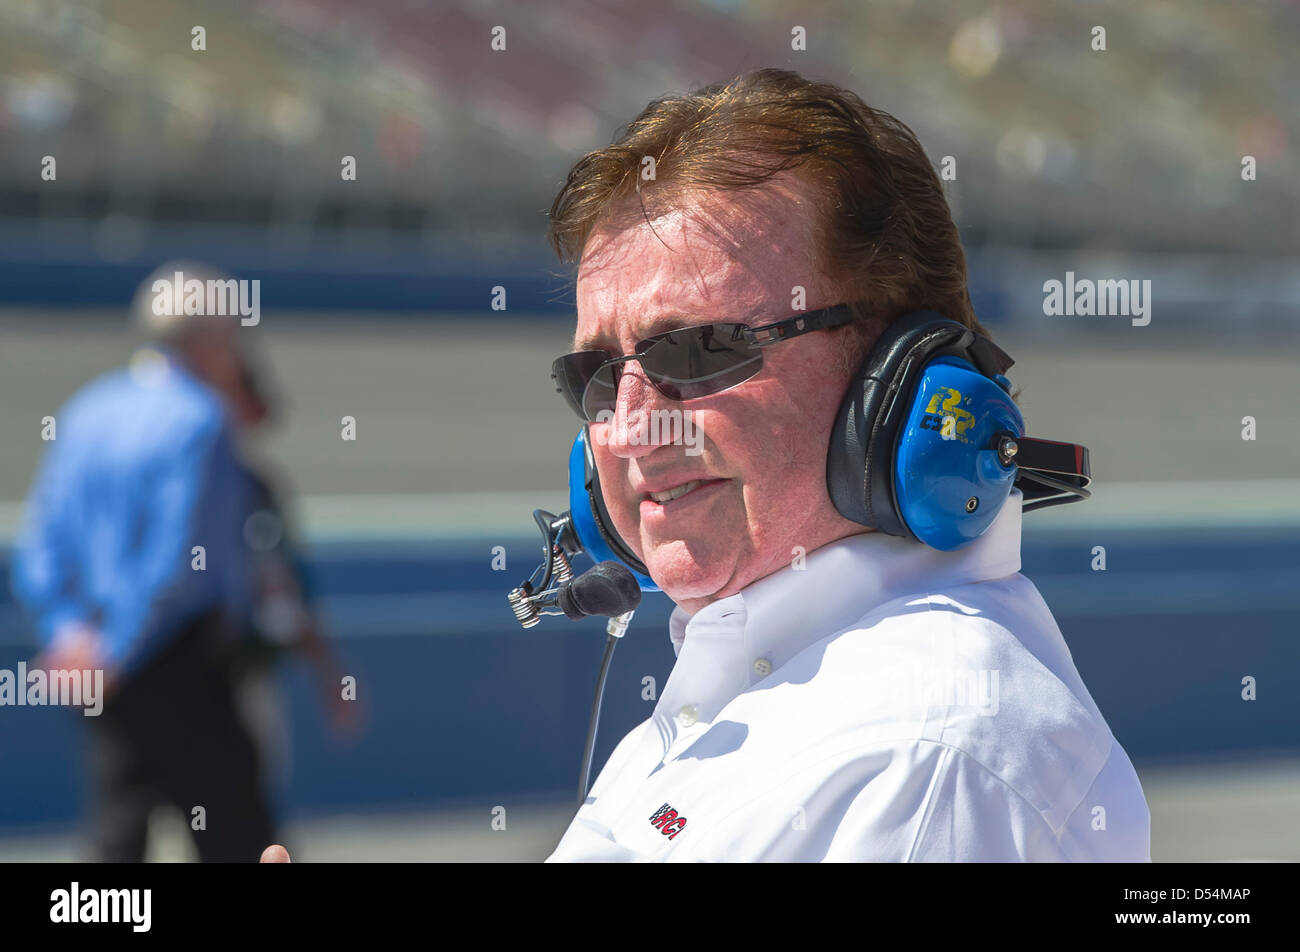 Fontana, California, USA. 23rd March 2013. Richard Childress watches the Nationwide Series teams take to the track for the Royal Purple 300 at the Auto Club Speedway in FONTANA, CA. Credit:  Cal Sport Media / Alamy Live News Stock Photo